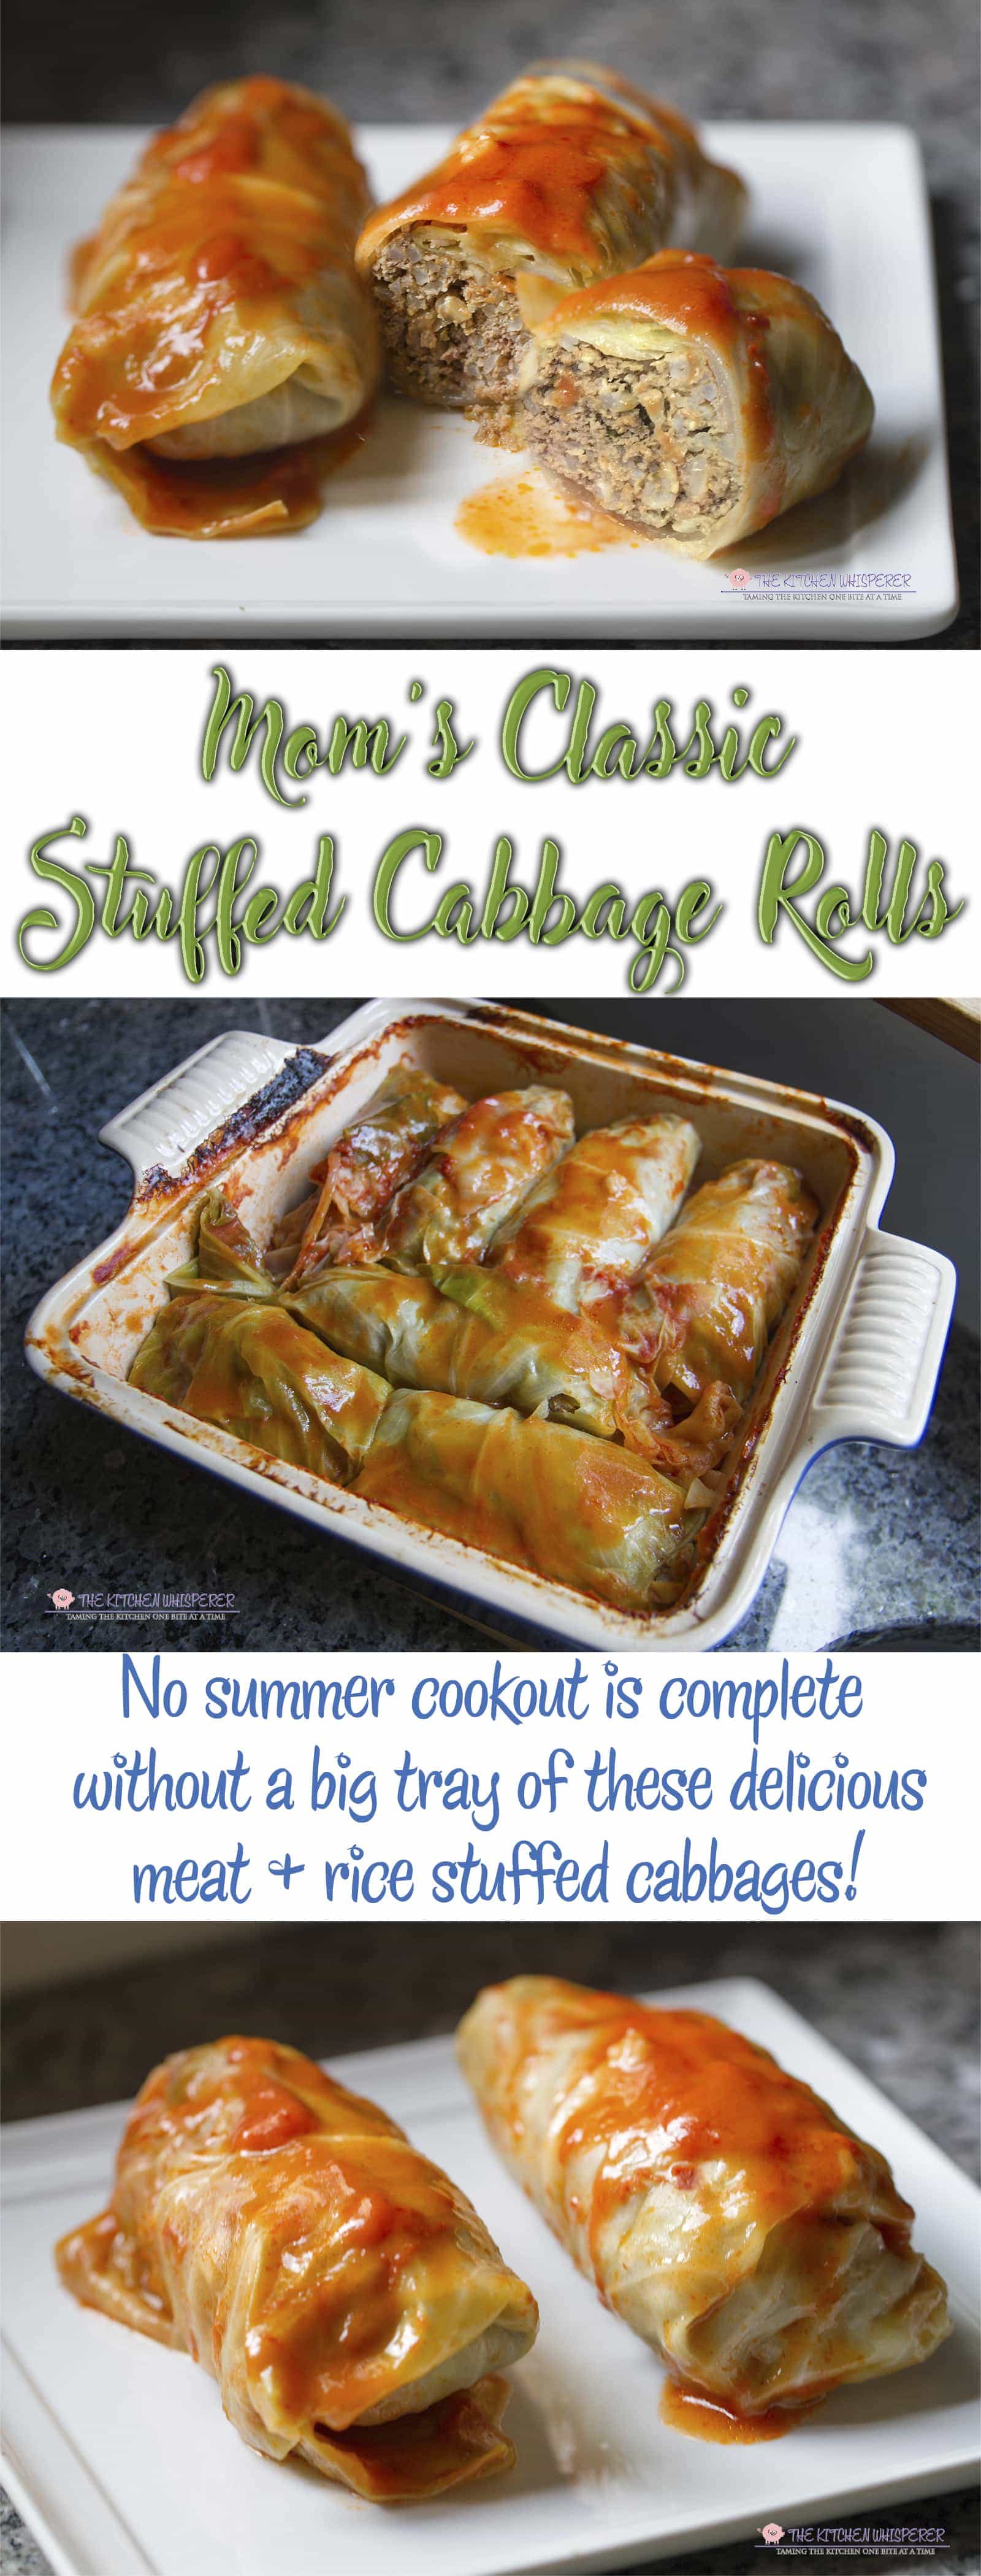 No summer cookout is complete without a tray of stuffed cabbages! Tender cabbage leaves stuffed with rice, seasoned ground meats and a rich tomato sauce make this the perfect summer comfort food. Plus these freeze beautifully! homemade stuffed cabbage, best cabbage rolls, beef and cabbage rolls, halupki, pigs in a blanket, #stuffedcabbage #pigsinablanket